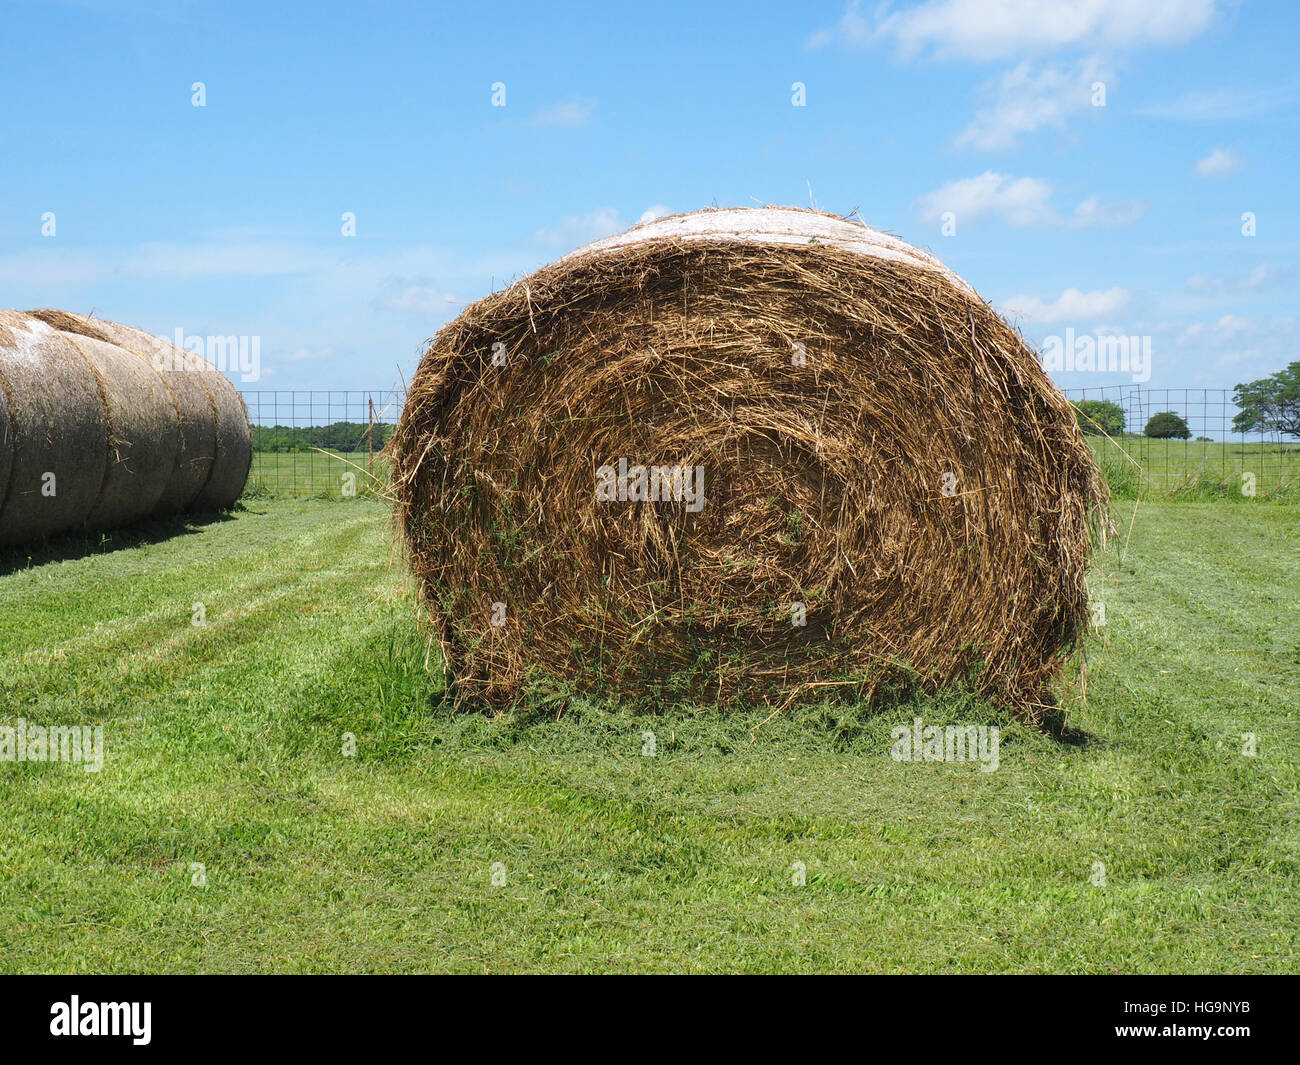 large round rolled hay bale used as animal fodder Stock Photo